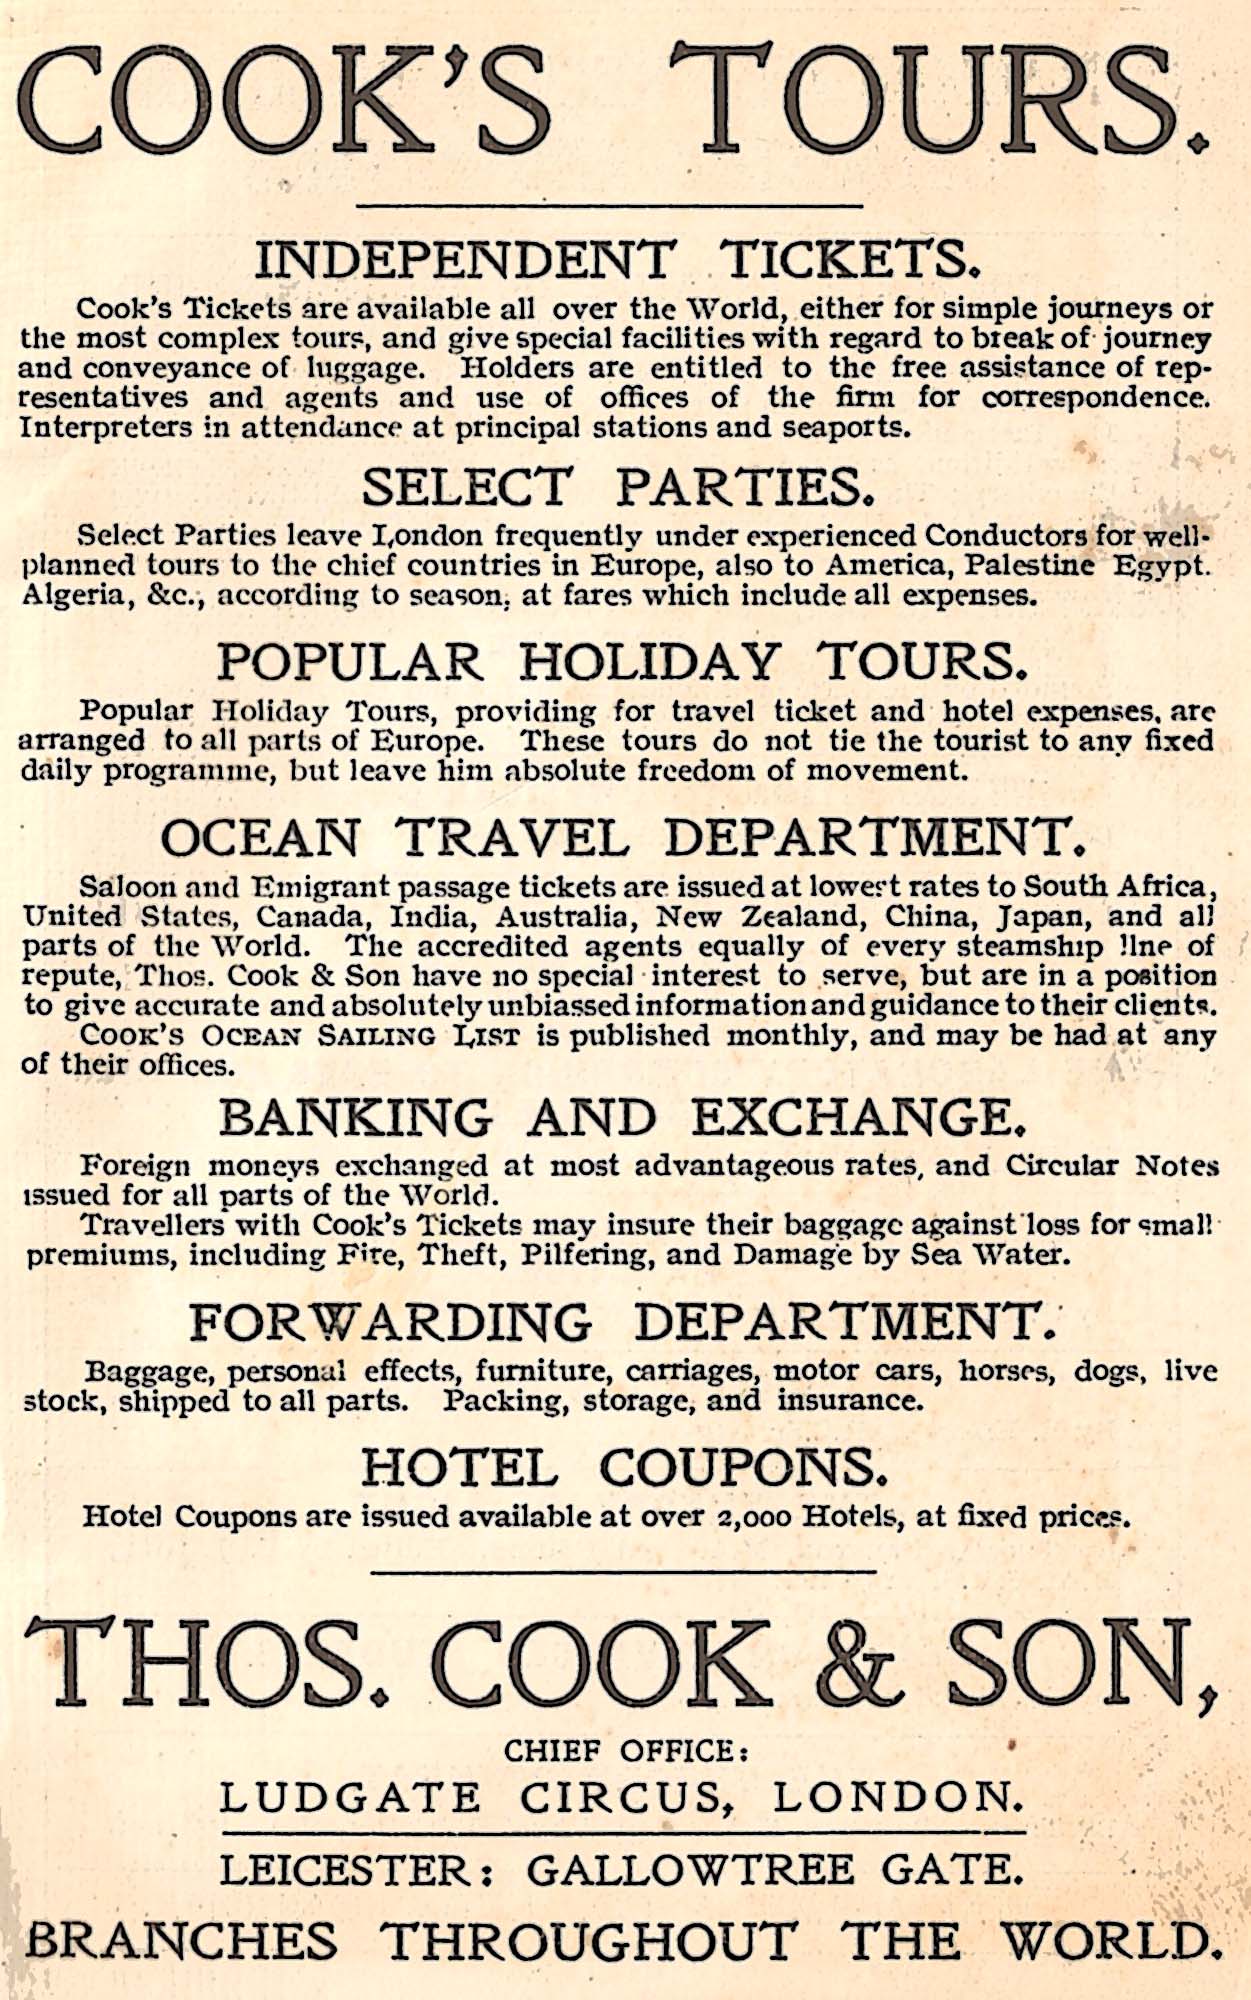 A Cook’s Tours advertisement from 1907 - 